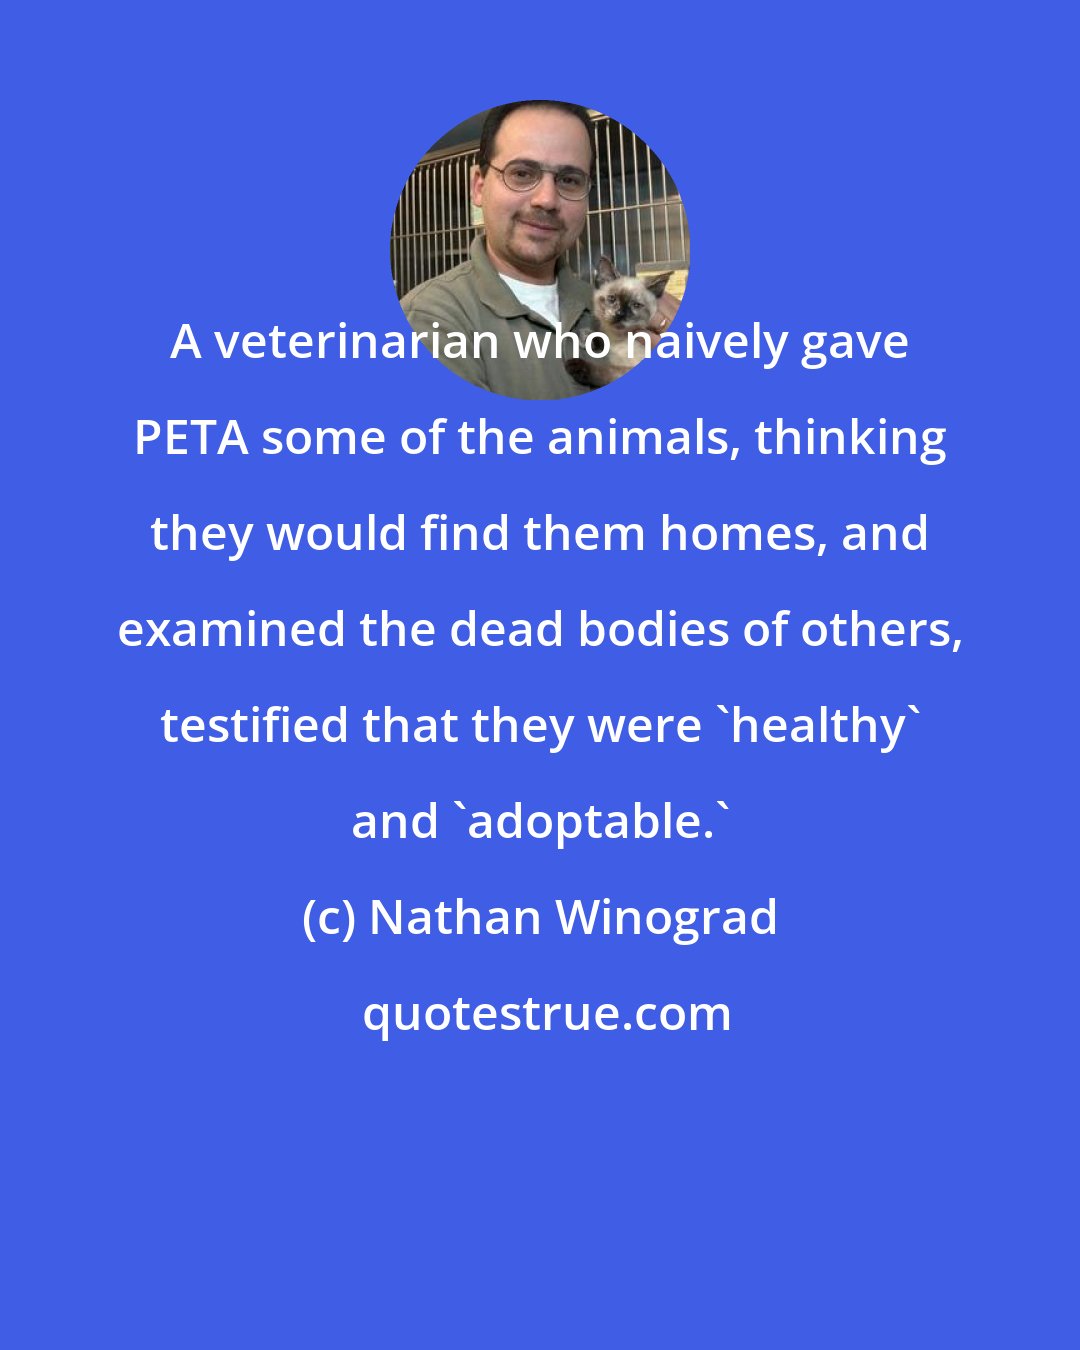 Nathan Winograd: A veterinarian who naively gave PETA some of the animals, thinking they would find them homes, and examined the dead bodies of others, testified that they were 'healthy' and 'adoptable.'